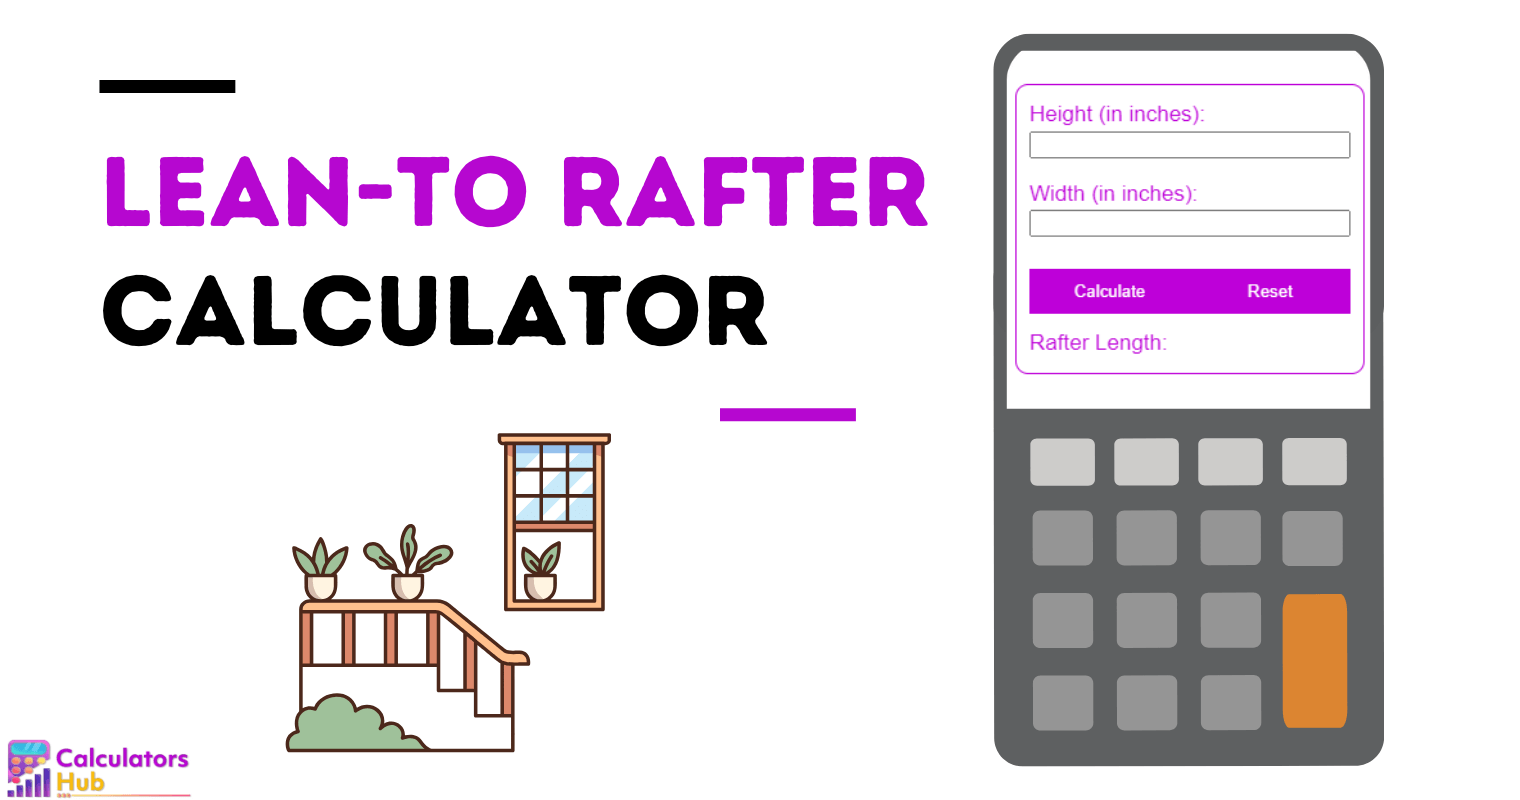 Lean-to Rafter Calculator